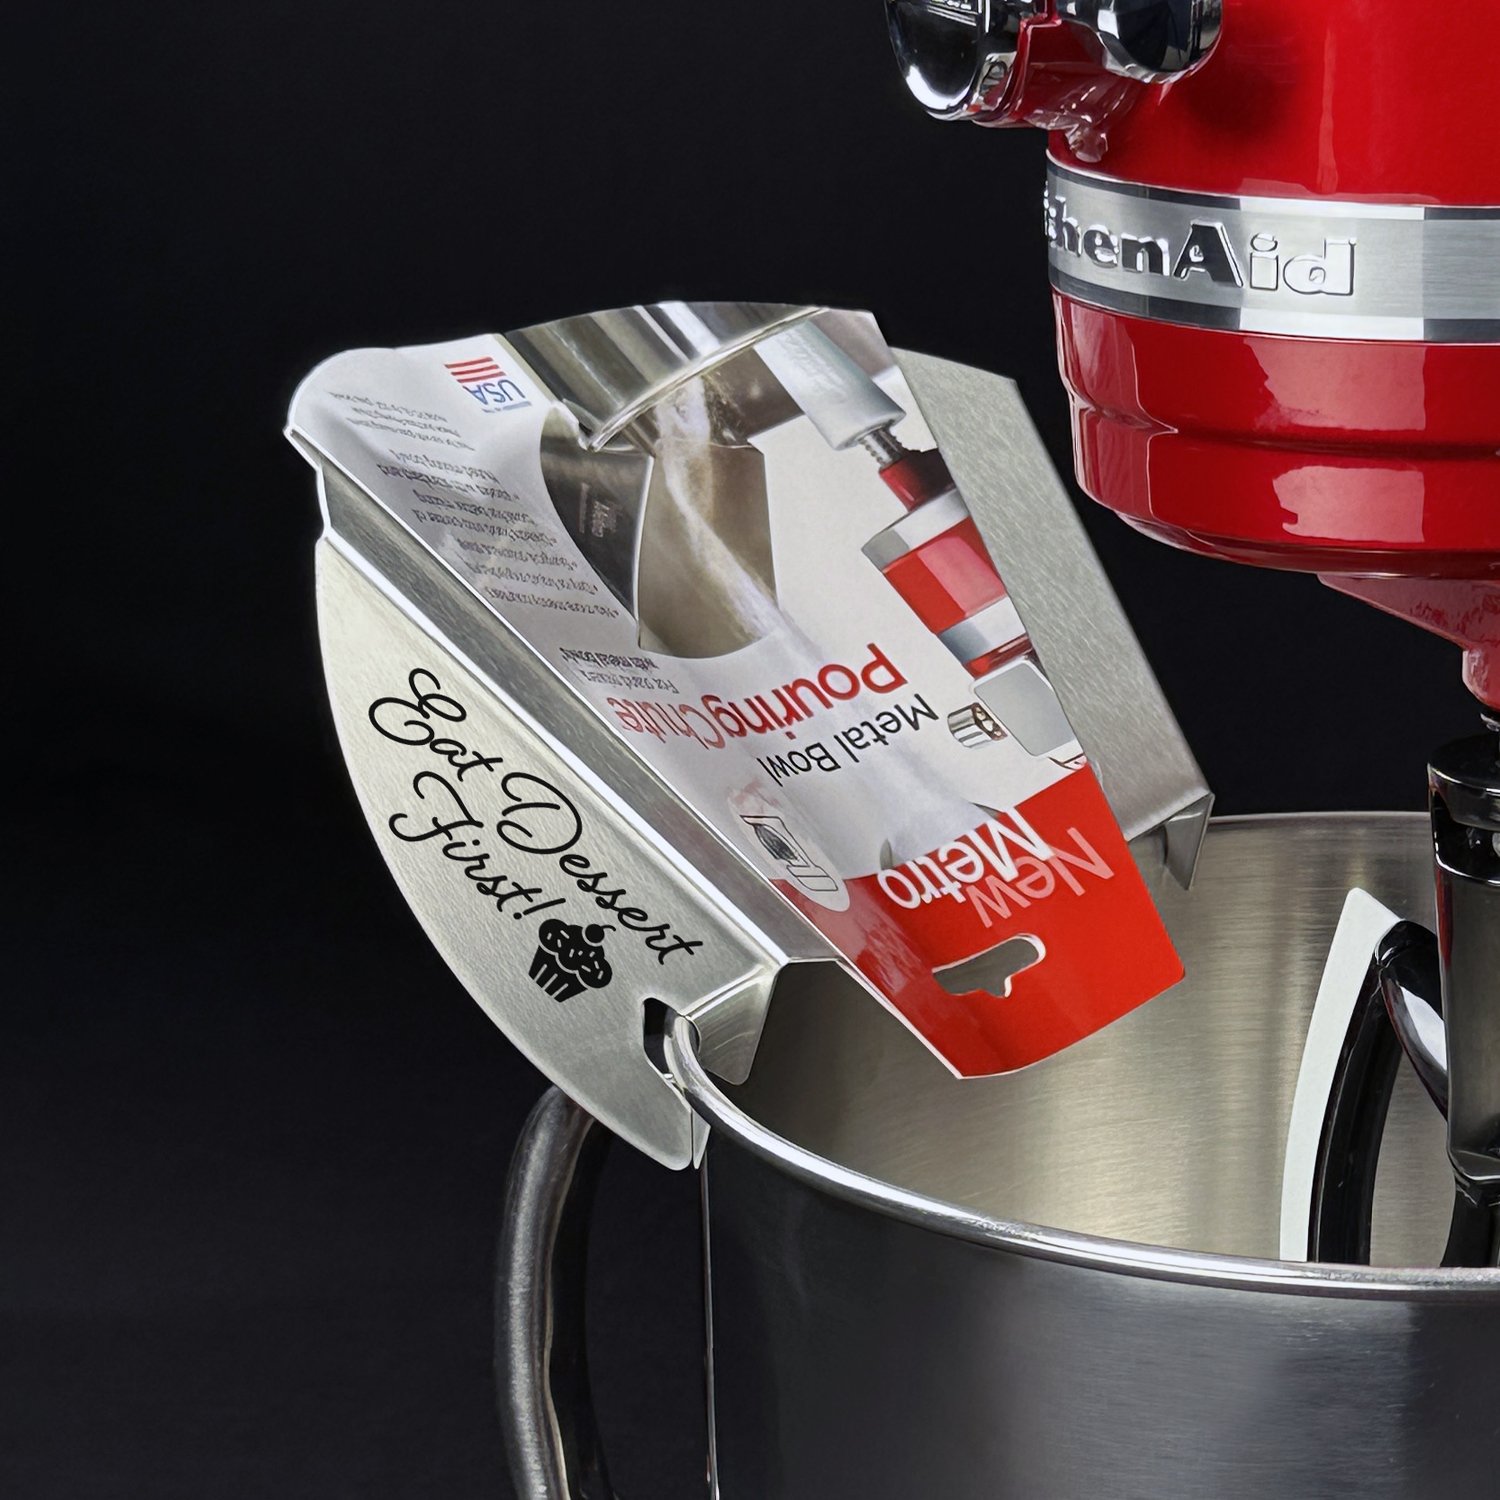 Cookistry's Kitchen Gadget and Food Reviews: New Metro Pouring Chute